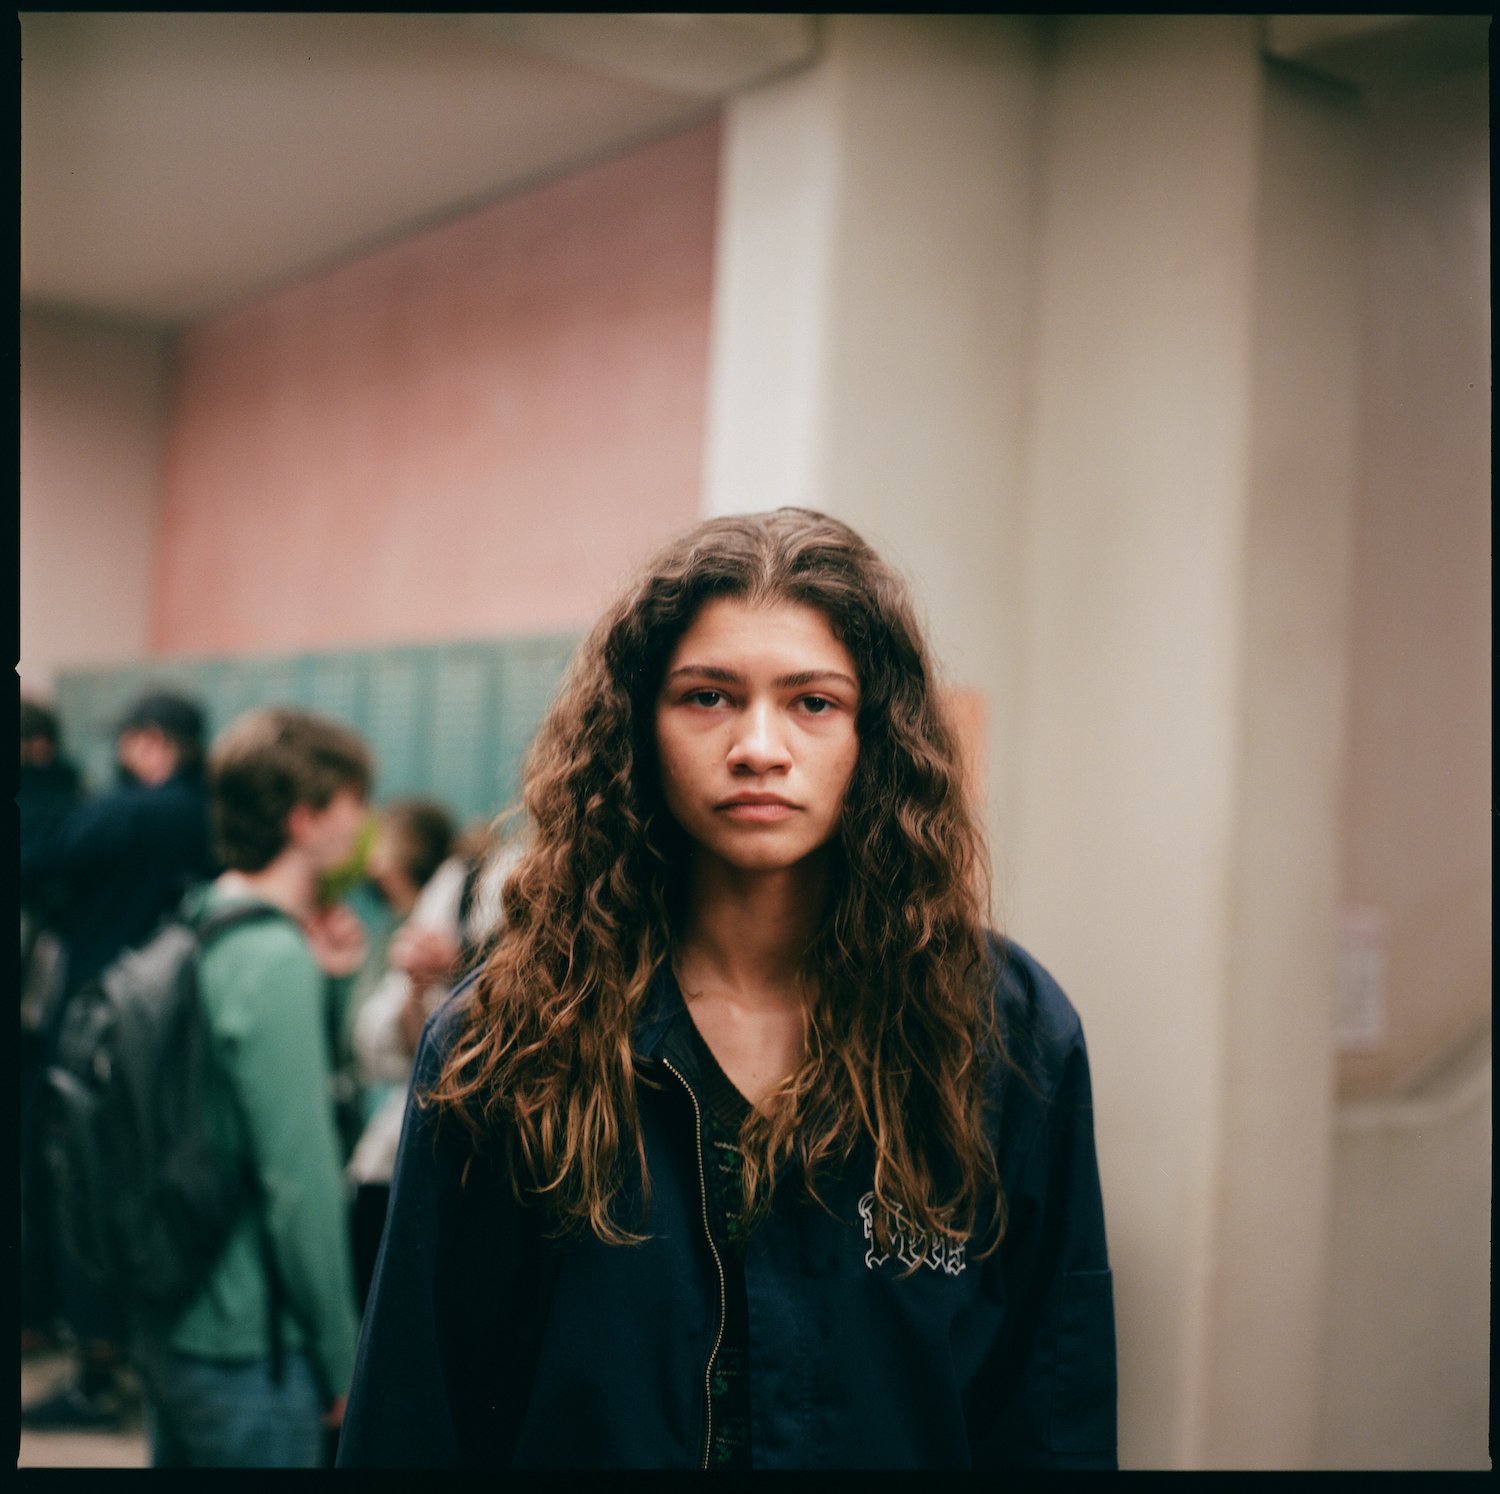 'Euphoria' Season 2 star Zendaya standing in front of lockers at a school wearing a blue zip-up hoodie in a production still.